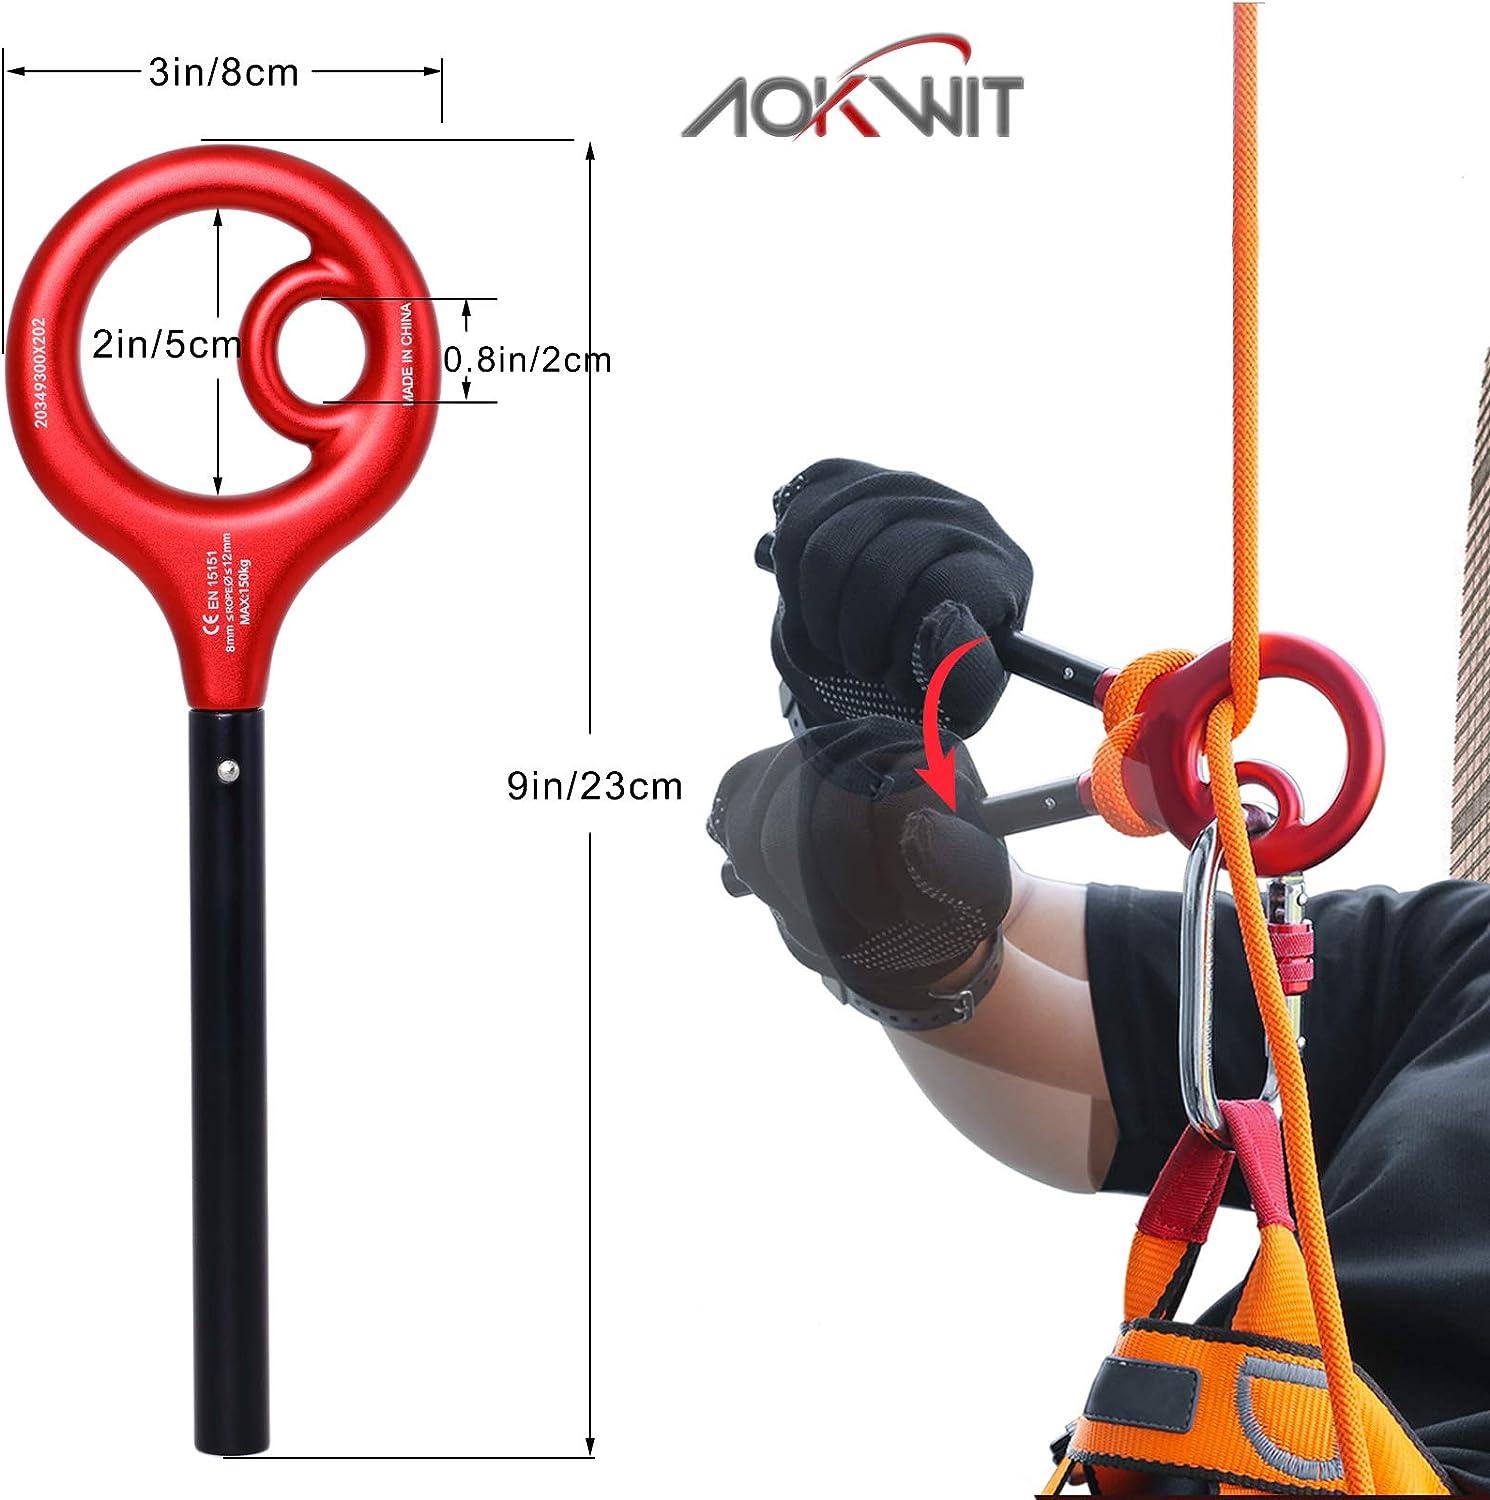 GM CLIMBING 40kN Rescue Figure 8 Descender with India